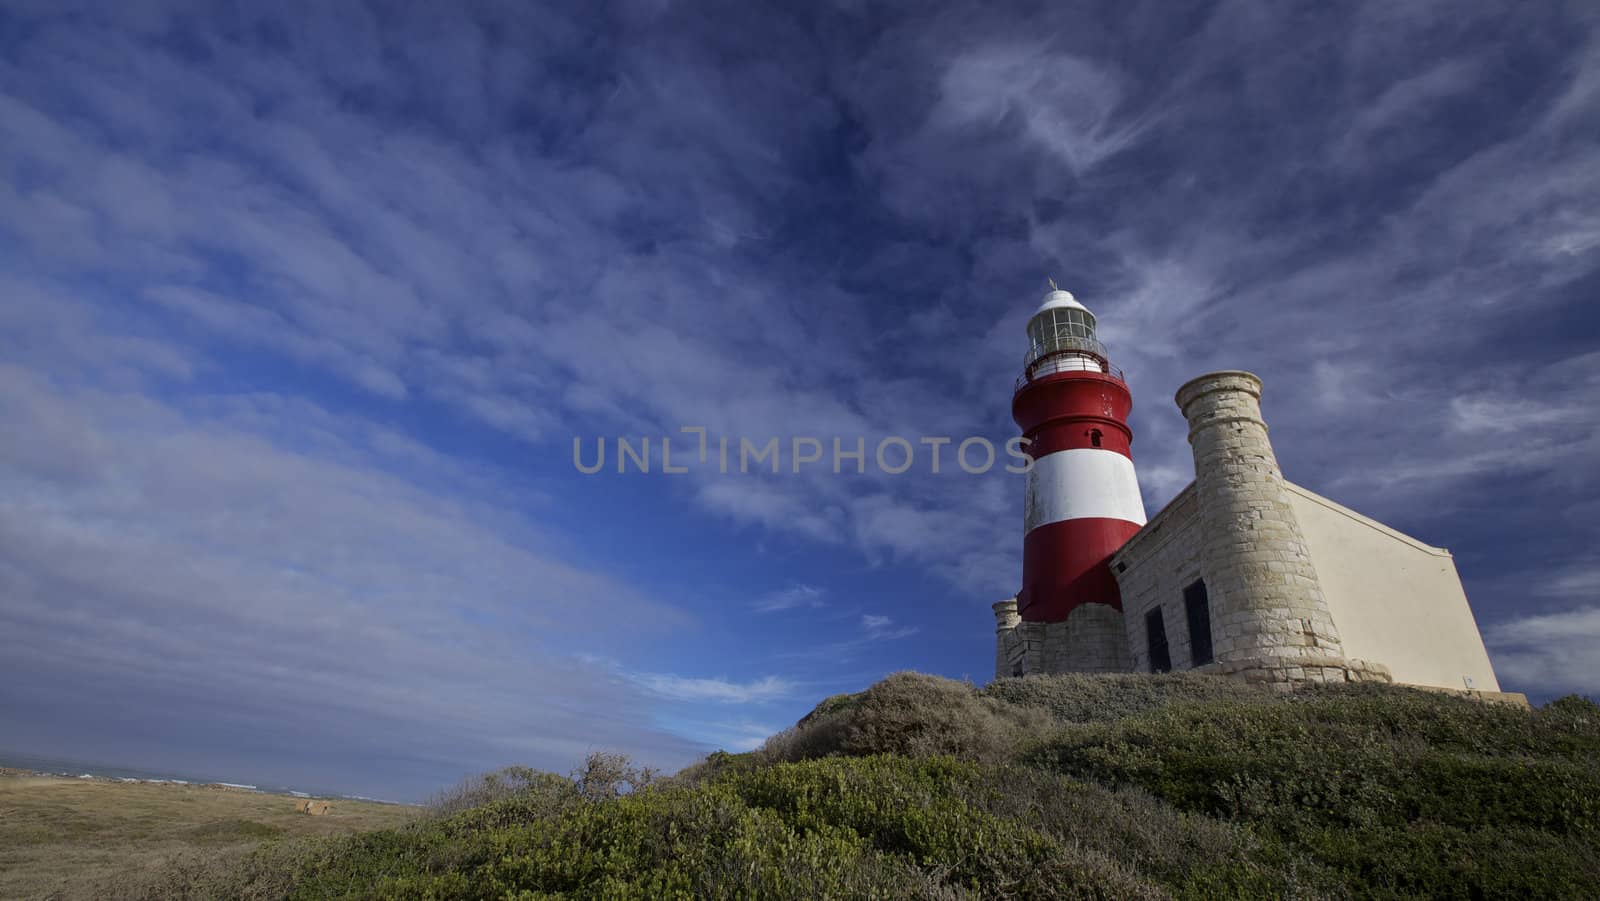 Lighthouse ( Cape Agulhas 1848 in South Africa )  by instinia